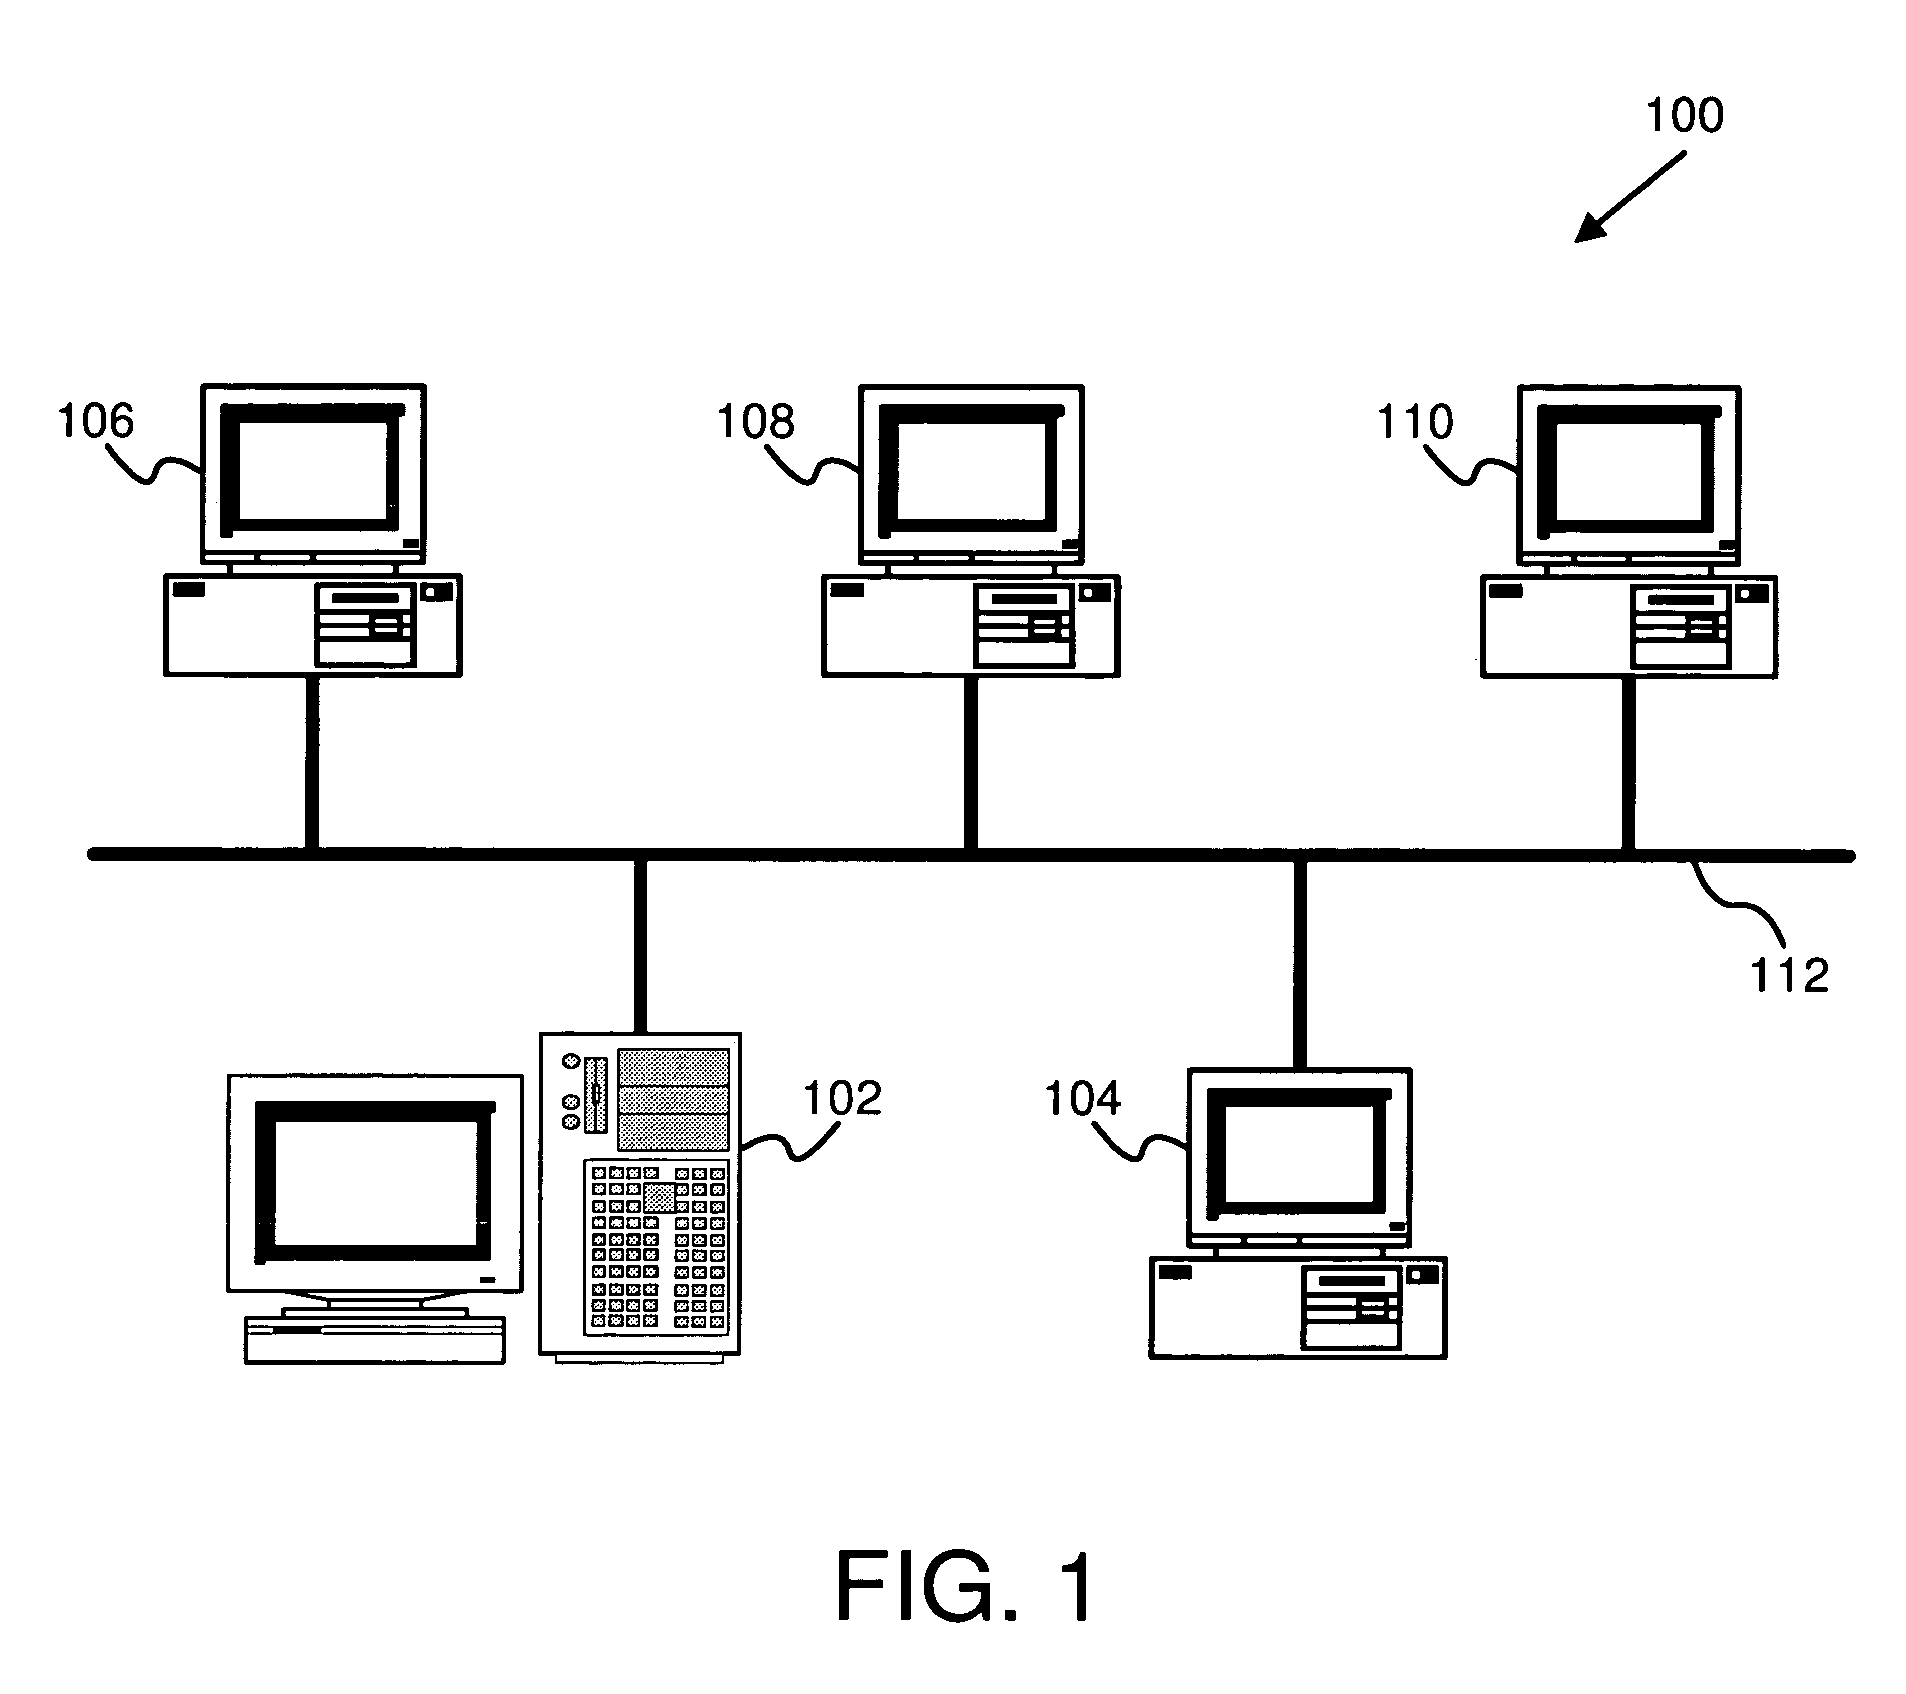 Apparatus, system, and method for on-demand control of grid system resources